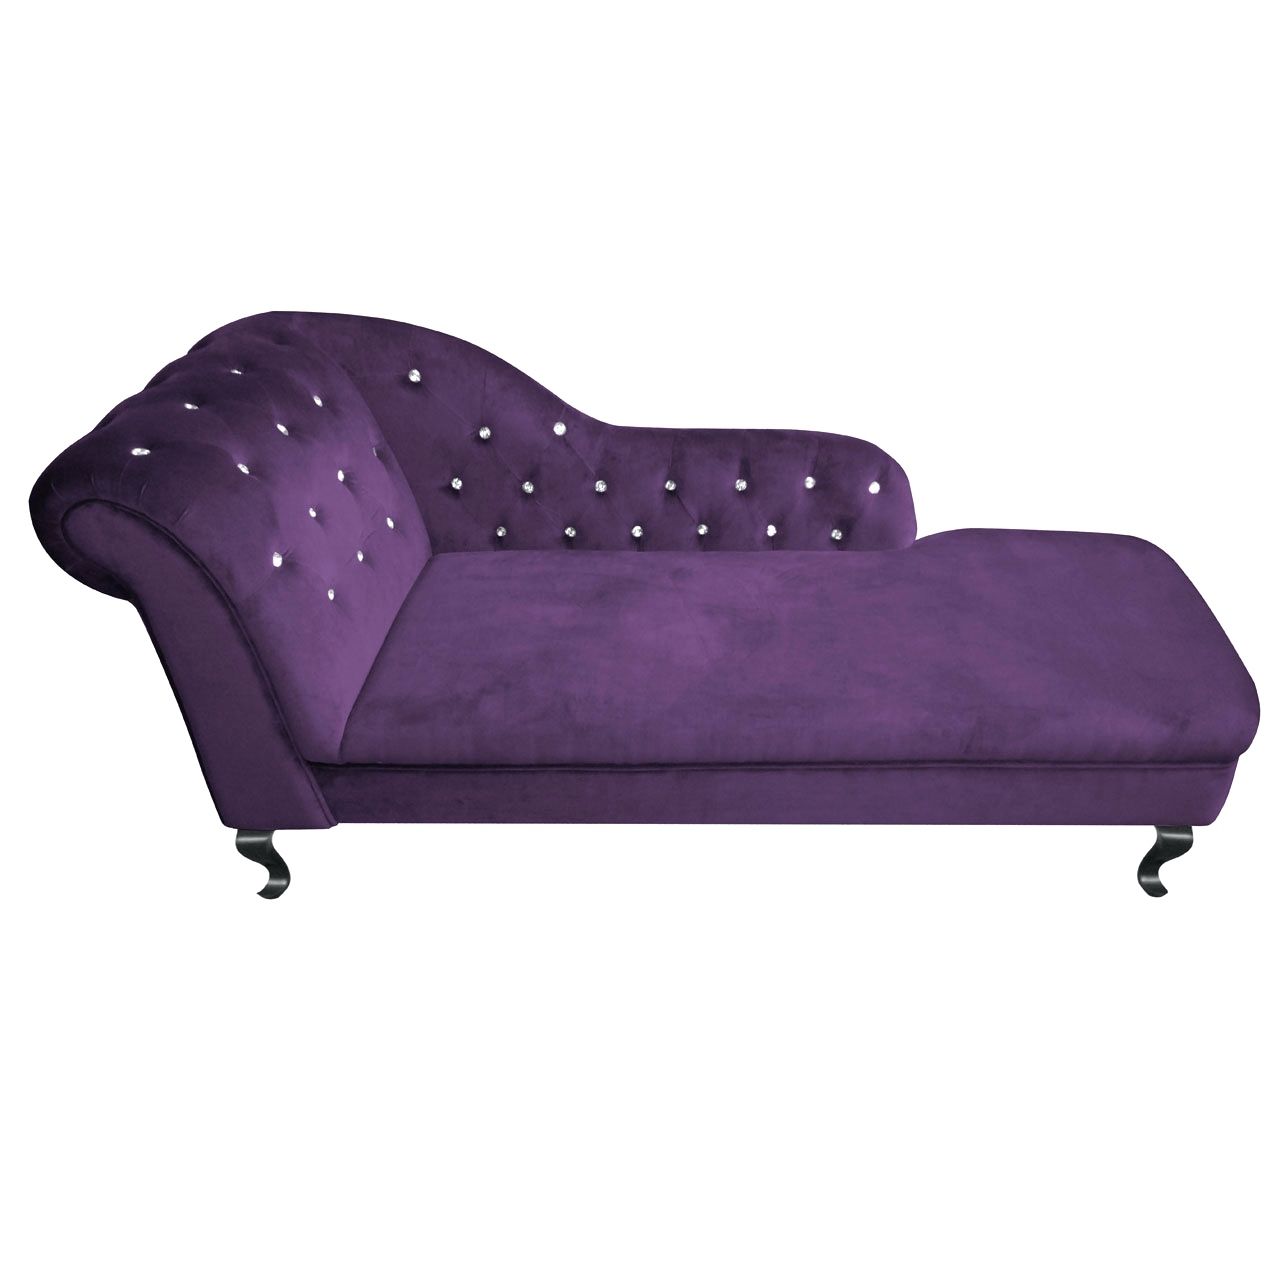 Purple Chaise Lounges Inside Widely Used Handy Living Chaise Lounge Chair Purple • Lounge Chairs Ideas (View 3 of 15)